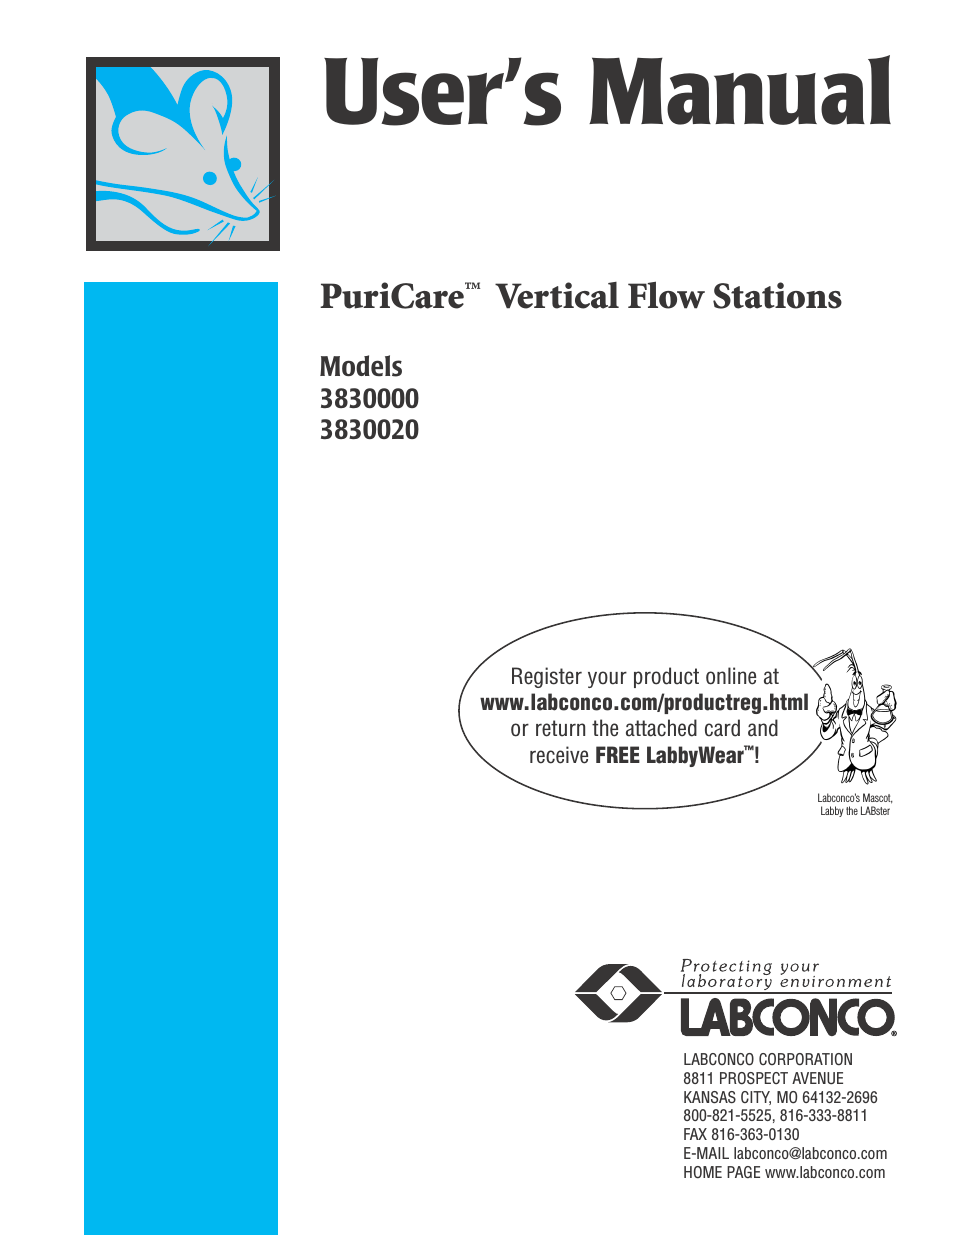 PuriCare Vertical Flow Stations 3830000